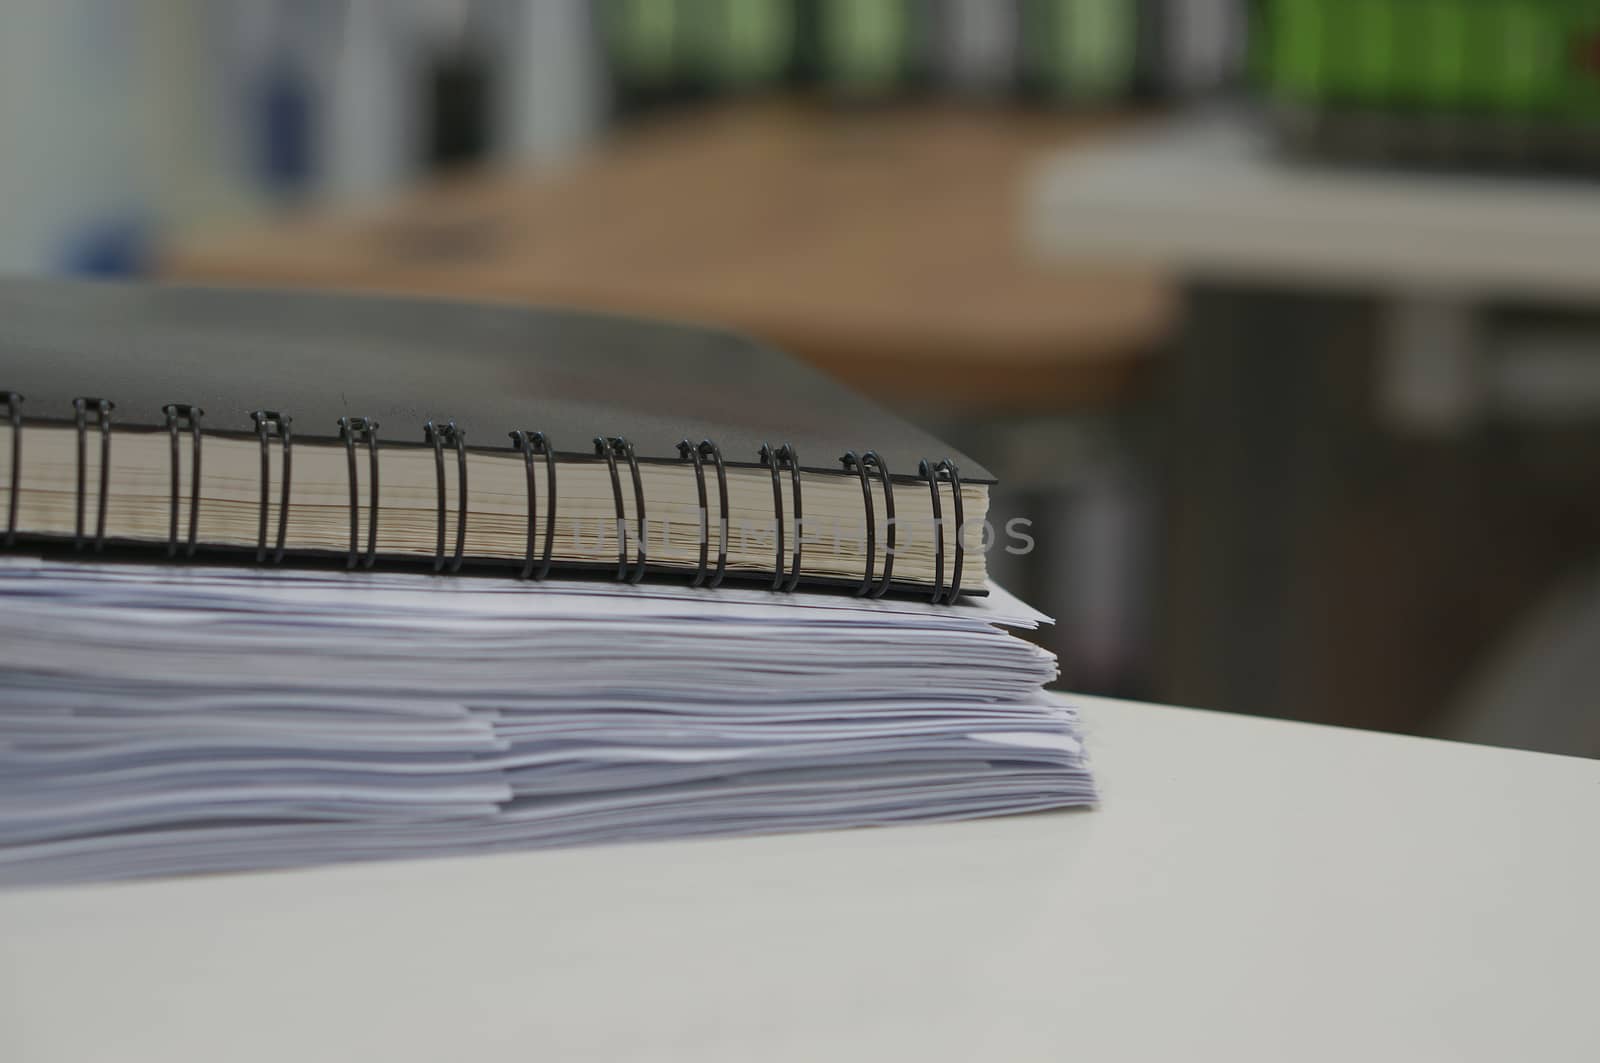 Black notebook and stack of data document  by ninun